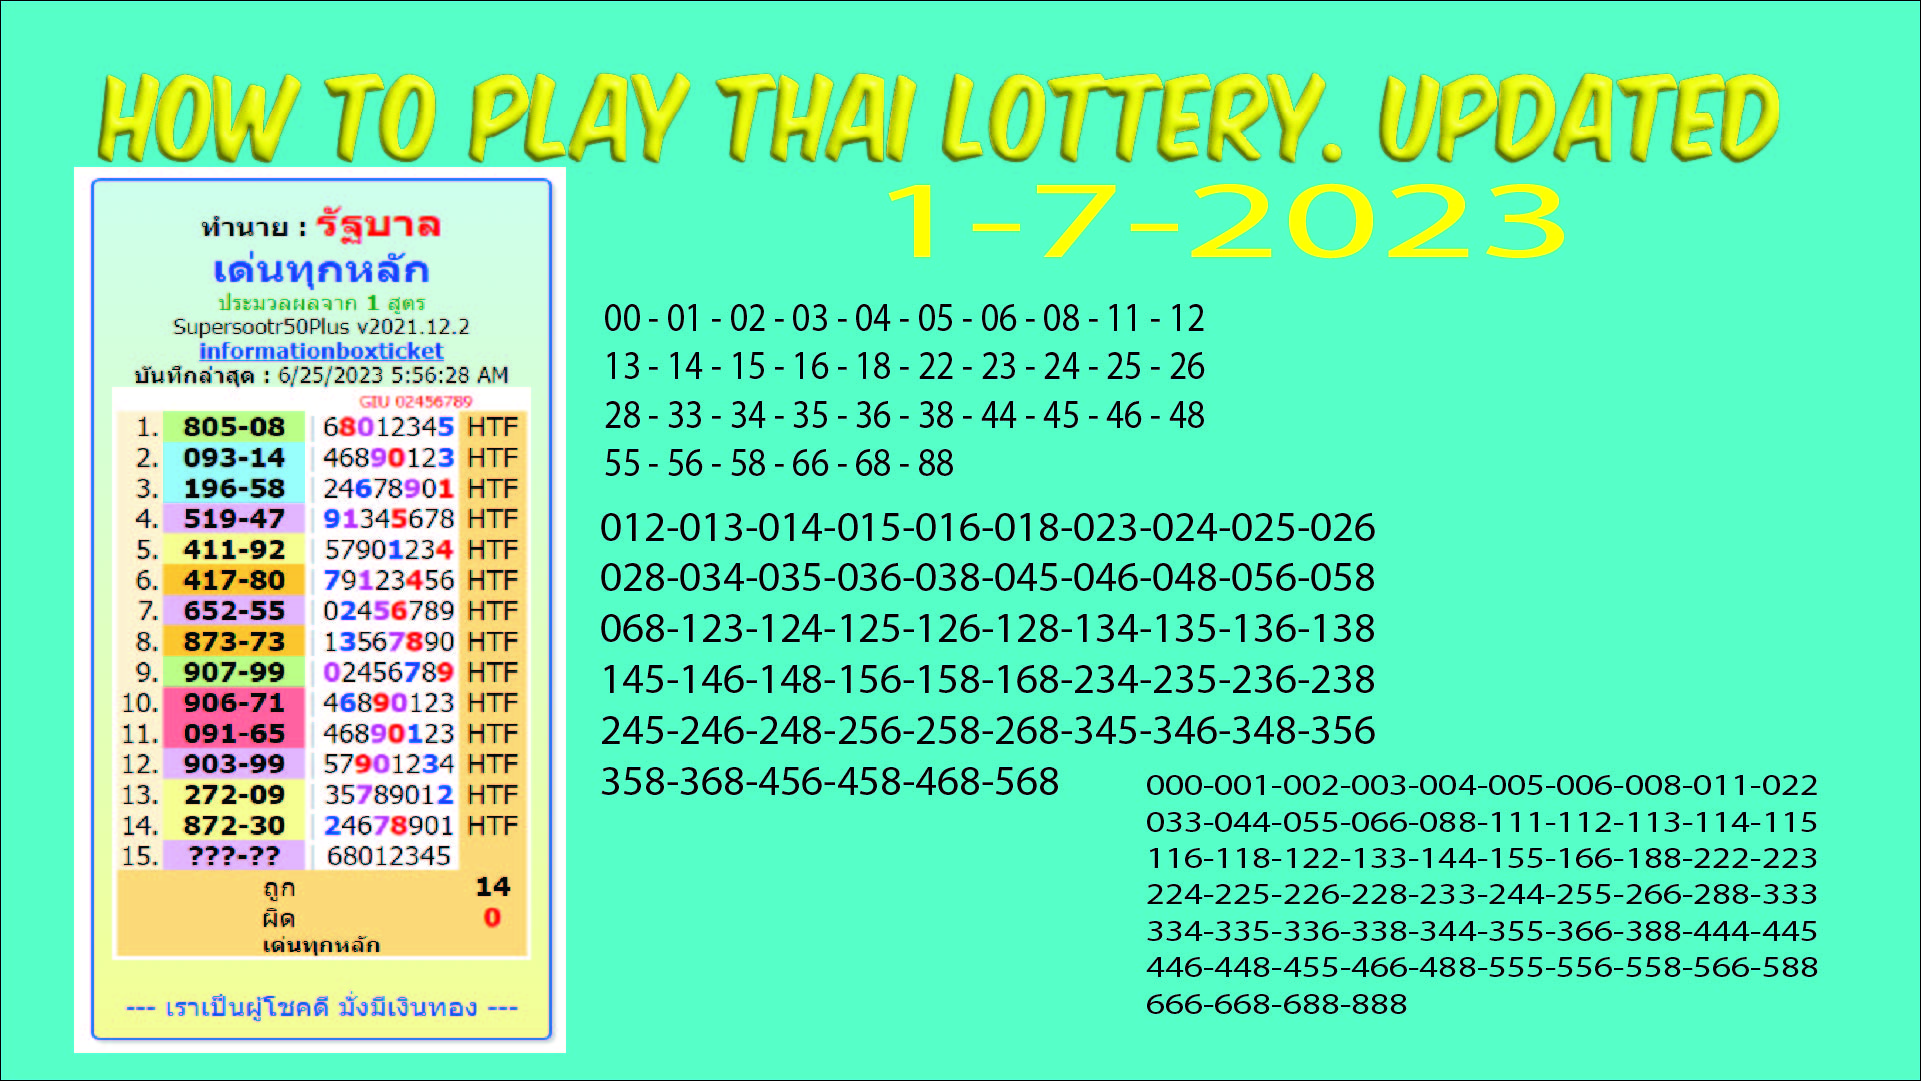 HOW TO PLAY THAI LOTTERY. Updated with 3up pairs by informationboxticket 1-7-2023